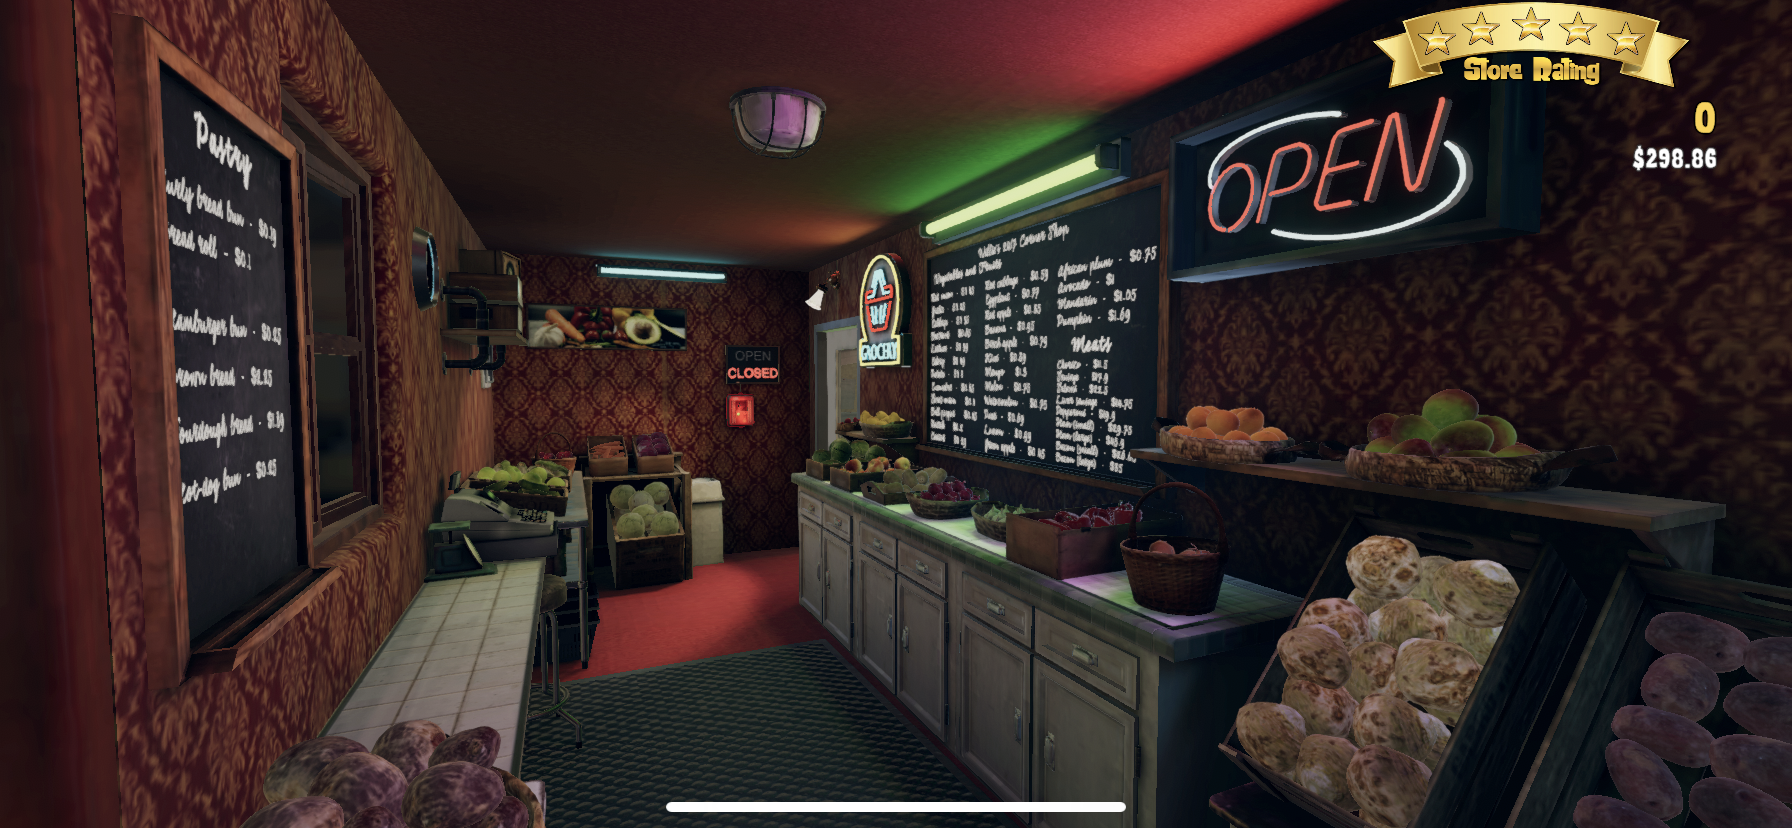 Screenshot of The Grocery Game